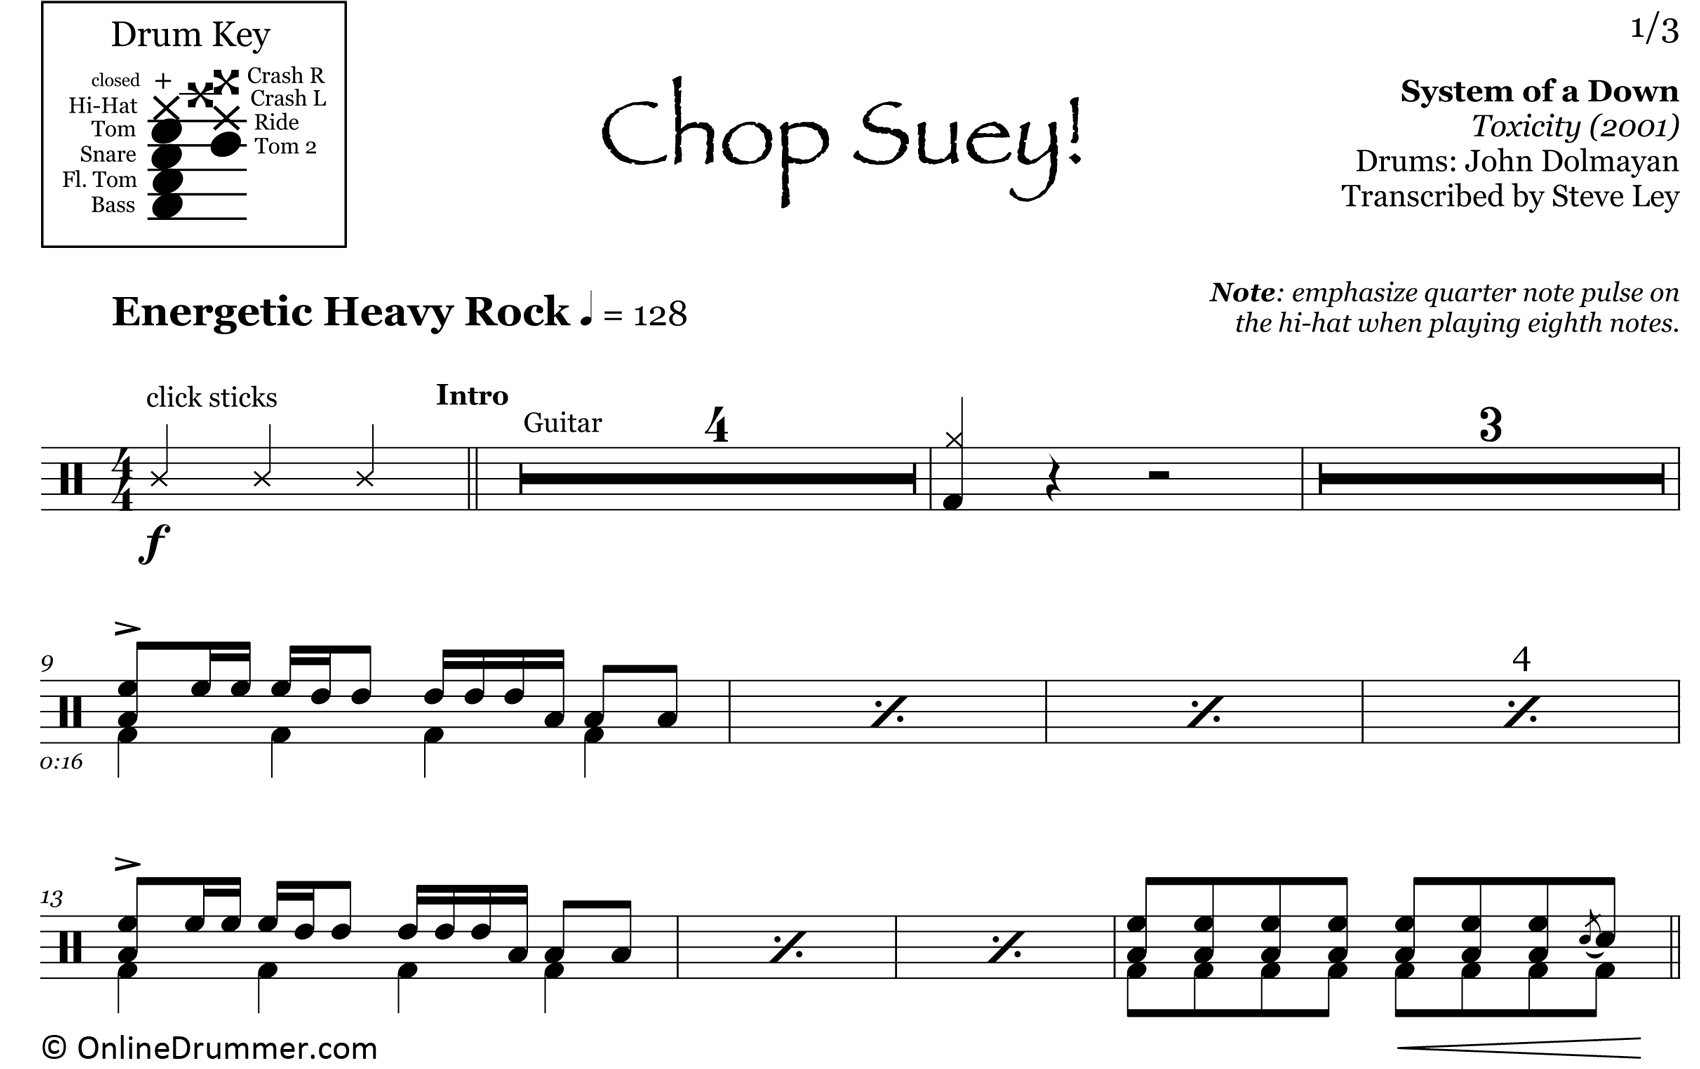 Chop Suey! - System of a Down - Drum Sheet Music